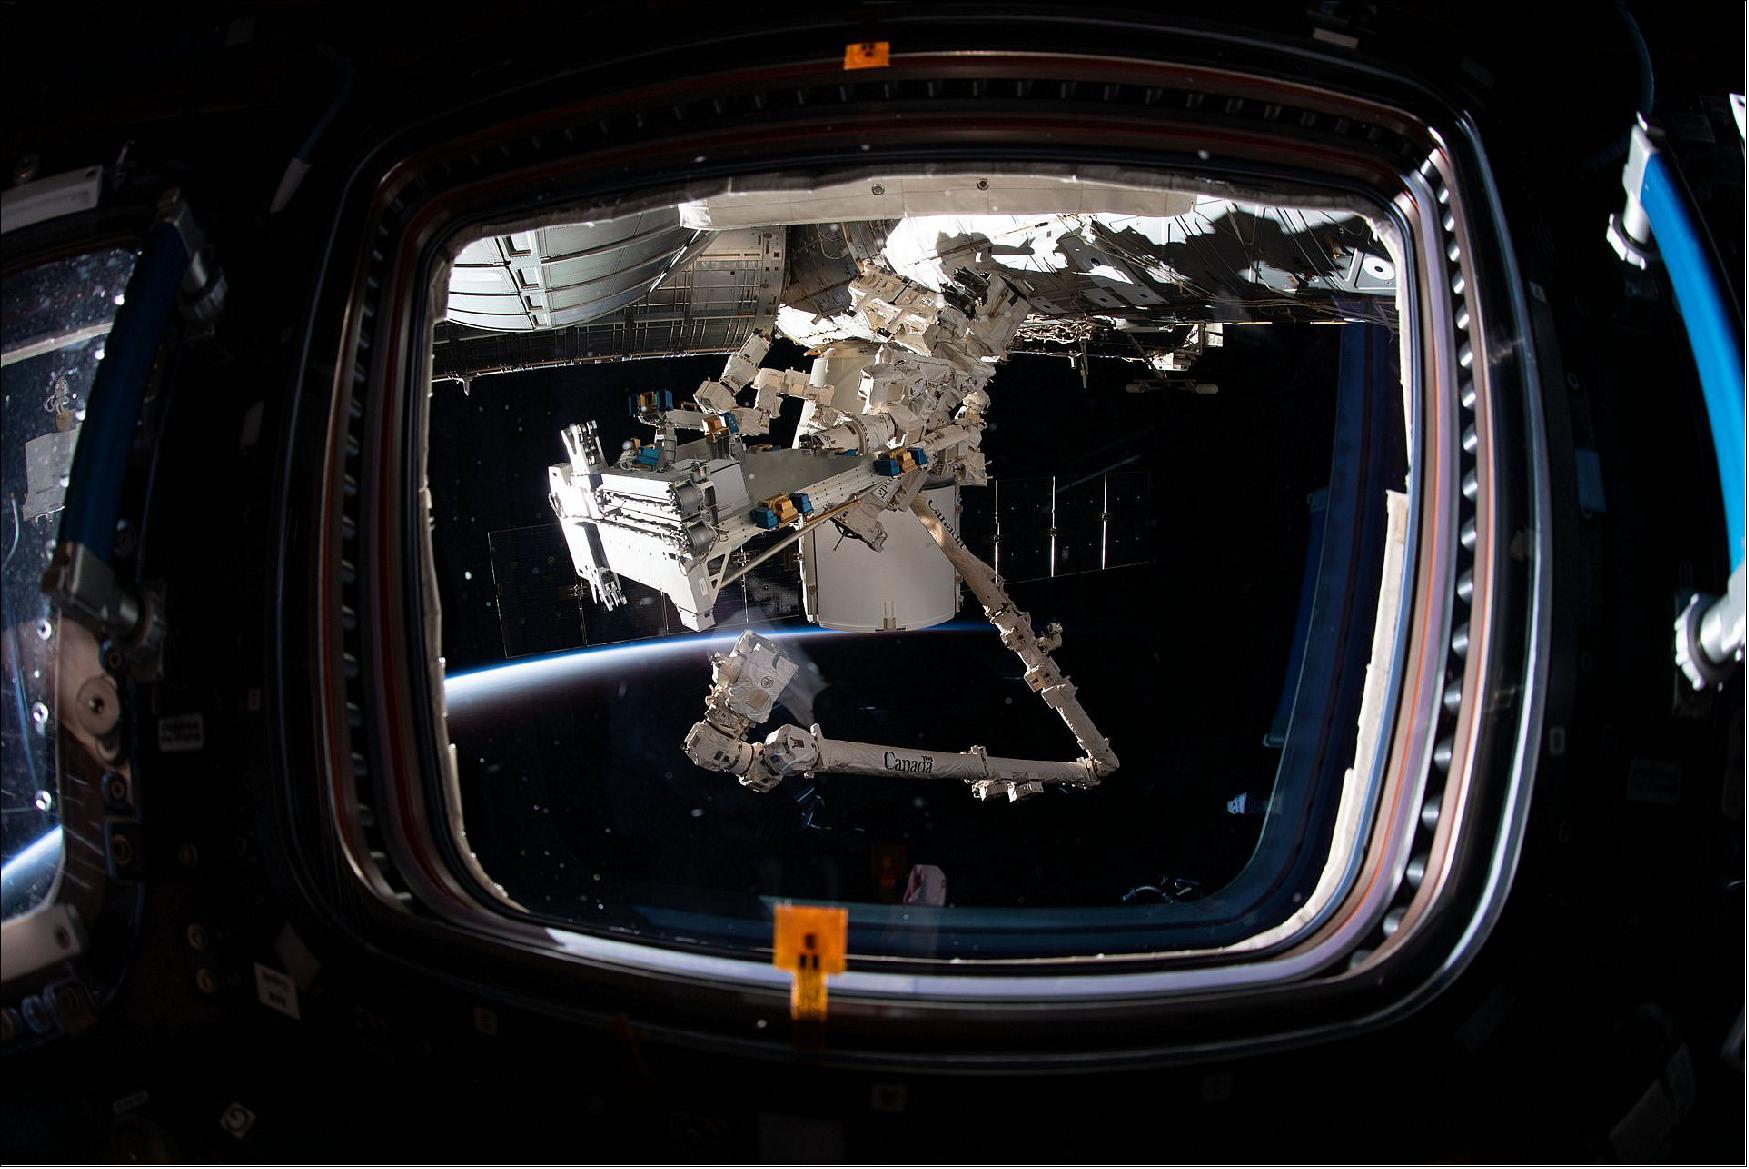 Figure 18: The mounting of the Bartolomeo platform onto the Columbus Laboratory as seen from the Cupola of the ISS (image credit: NASA, Airbus)